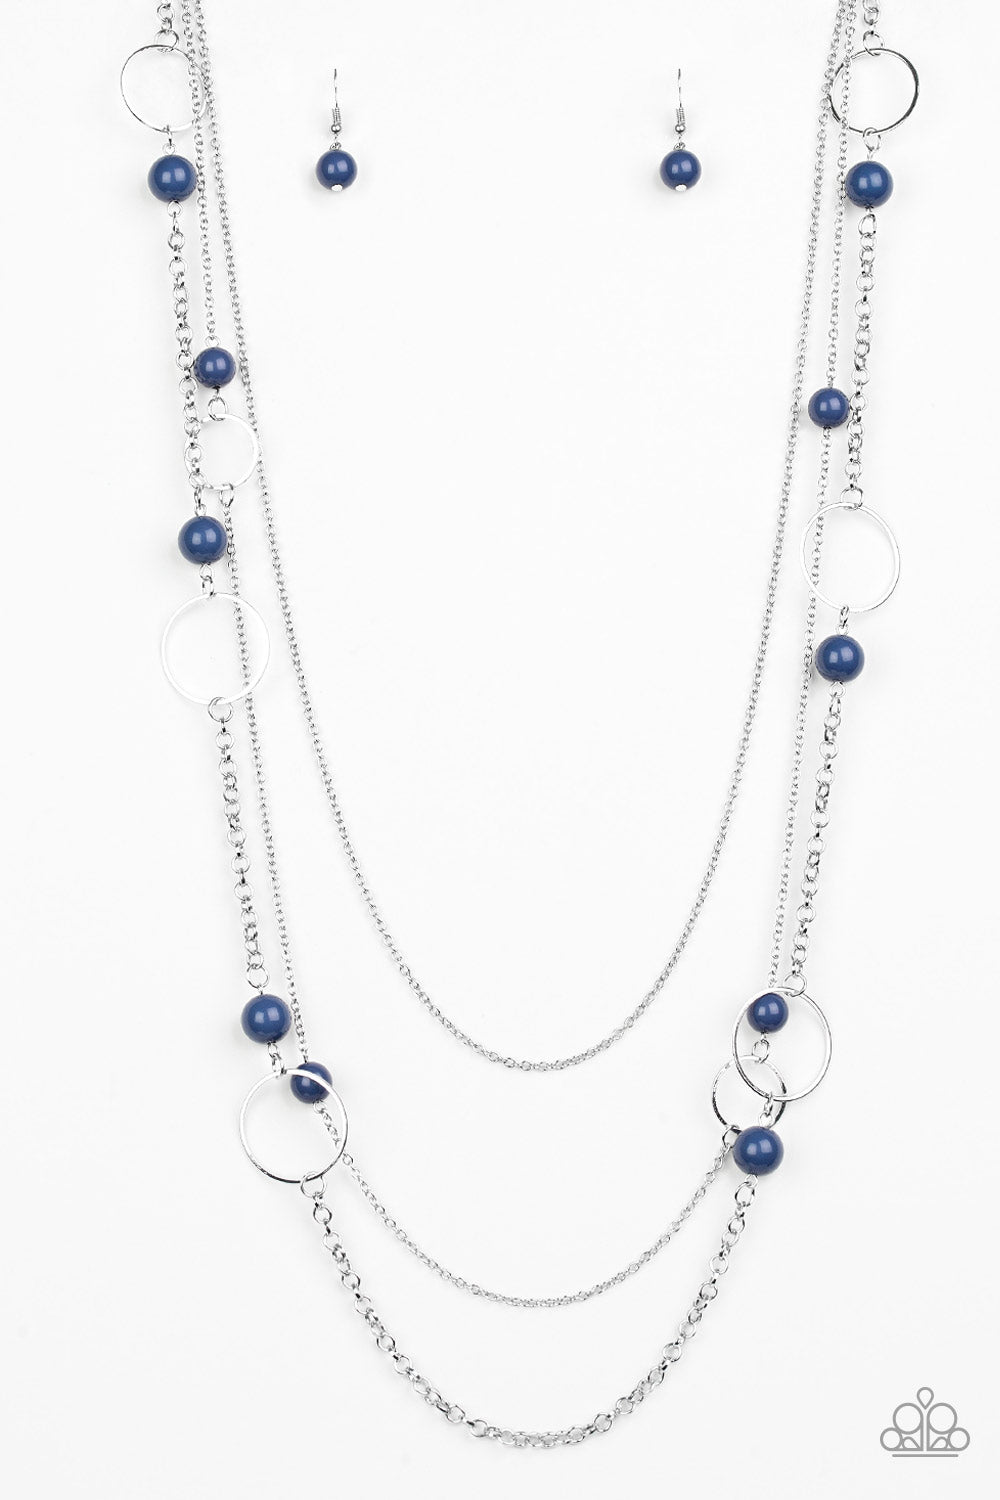 Paparazzi Accessories - Beachside Babe - Blue Necklace - Alies Bling Bar